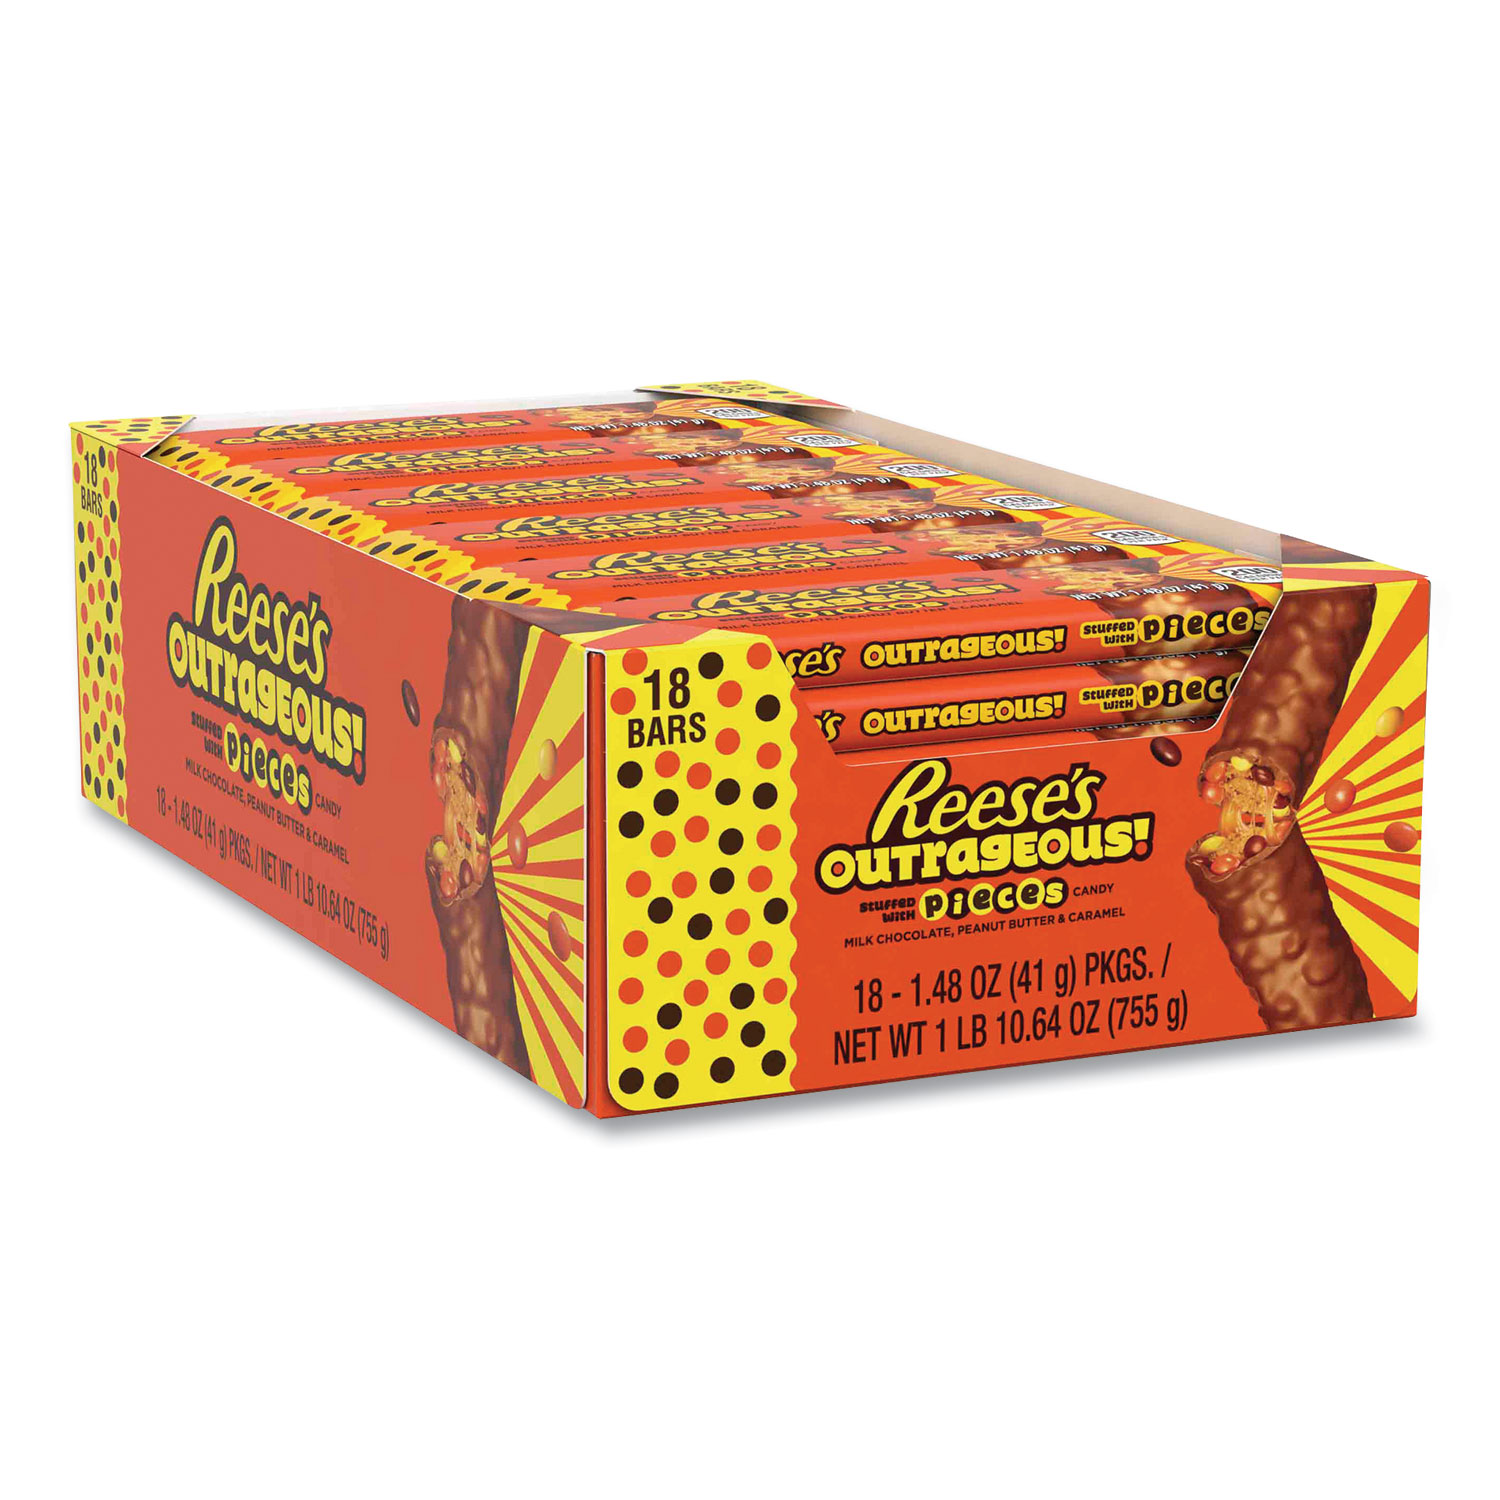  Reese's 41203 OUTRAGEOUS! Peanut Butter Chocolate Bar, 1.48 oz Bar, 18 Bars/Box, Free Delivery in 1-4 Business Days (GRR24600352) 